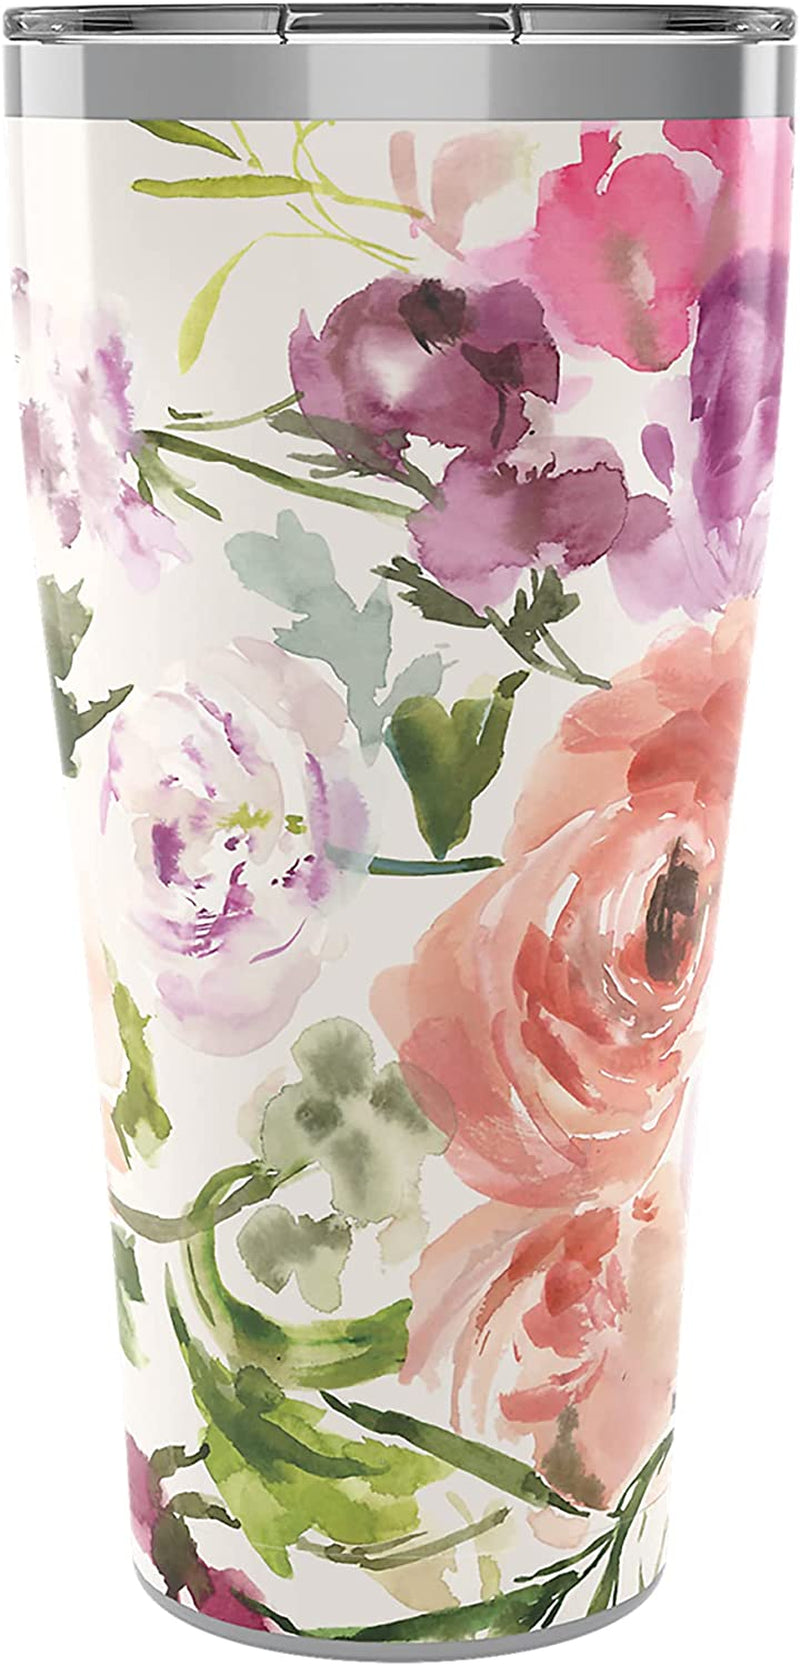 Tervis Made in USA Double Walled Kelly Ventura Floral Collection Insulated Tumbler Cup Keeps Drinks Cold & Hot, 16Oz 4Pk - Classic, Assorted Home & Garden > Kitchen & Dining > Tableware > Drinkware Tervis Heather Rose 30oz - Stainless Steel 